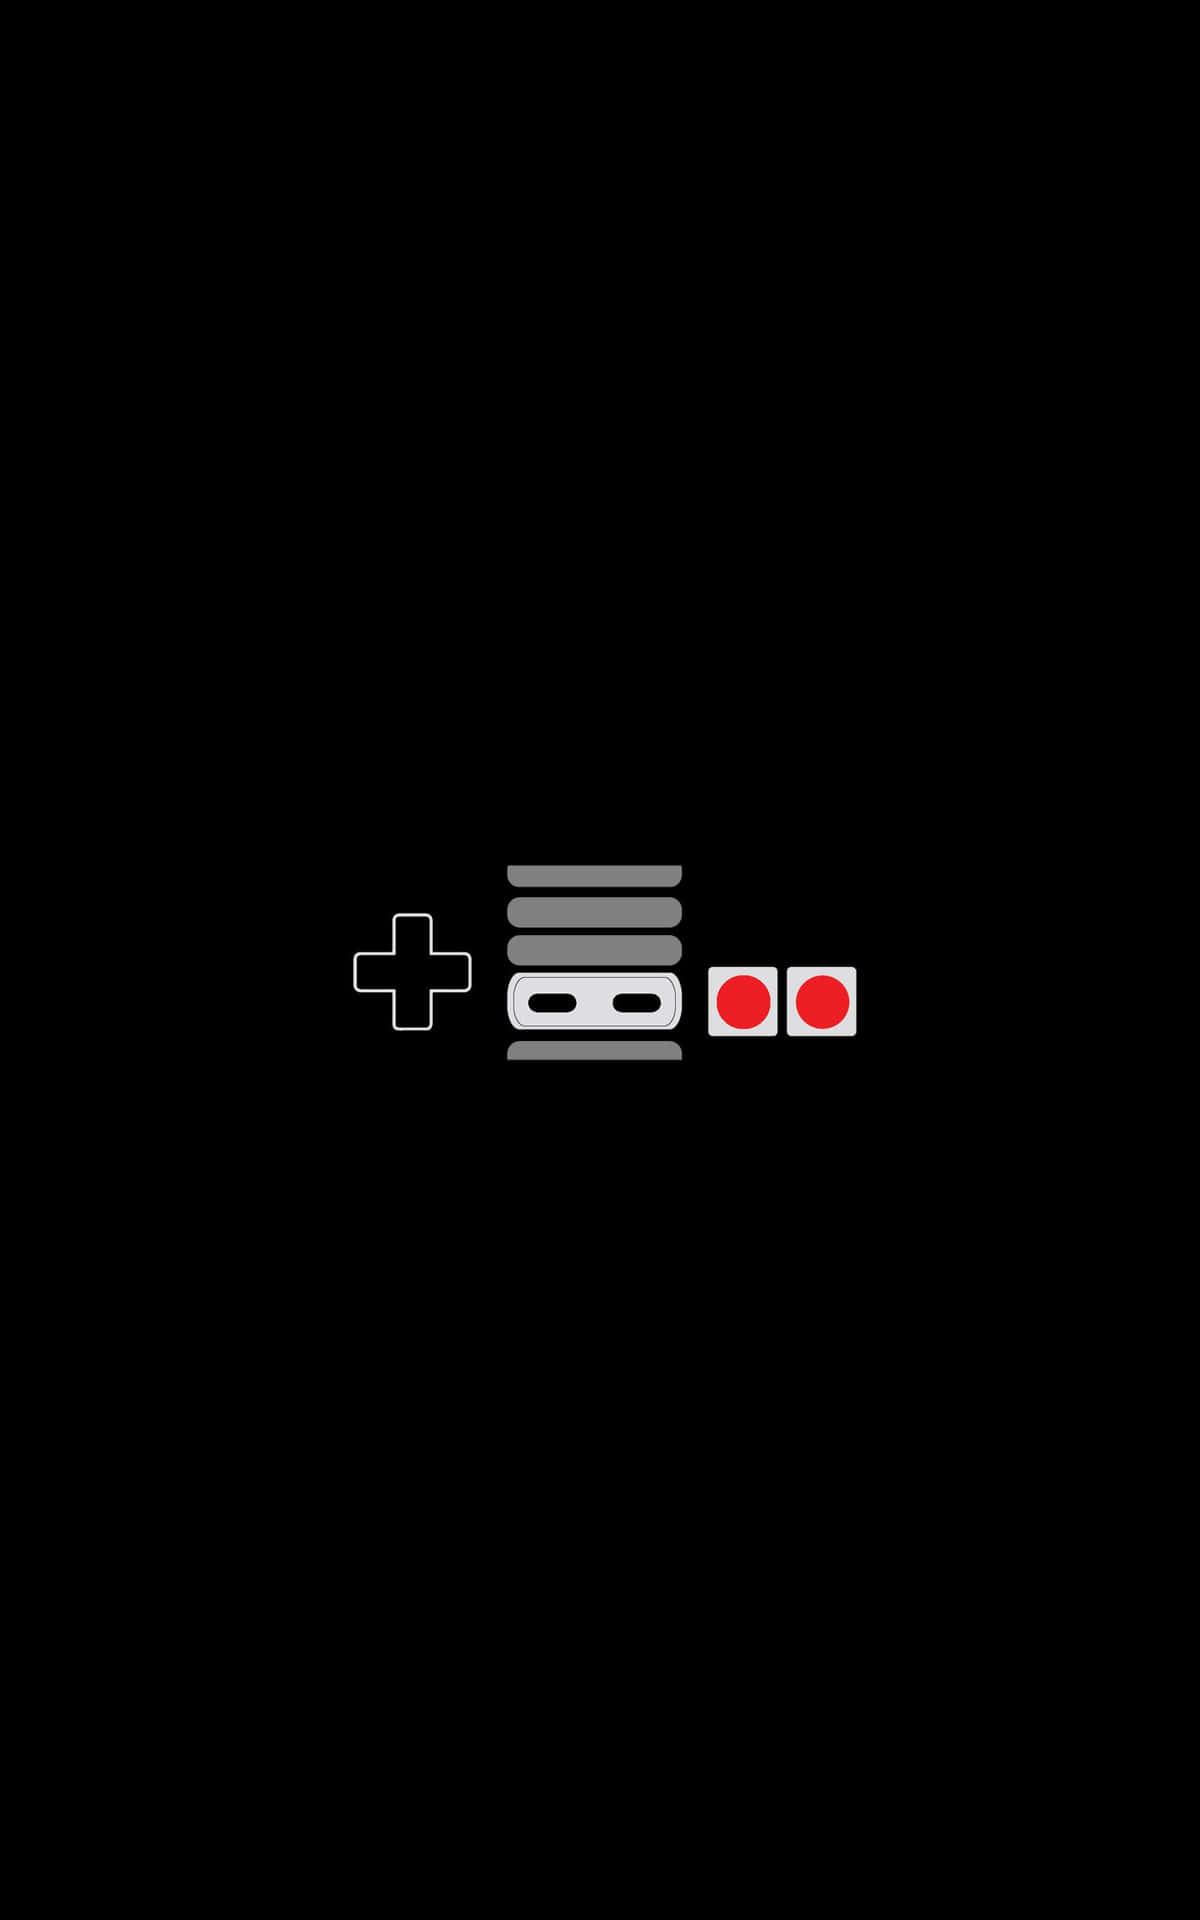 A Black Background With A Nintendo Game Controller